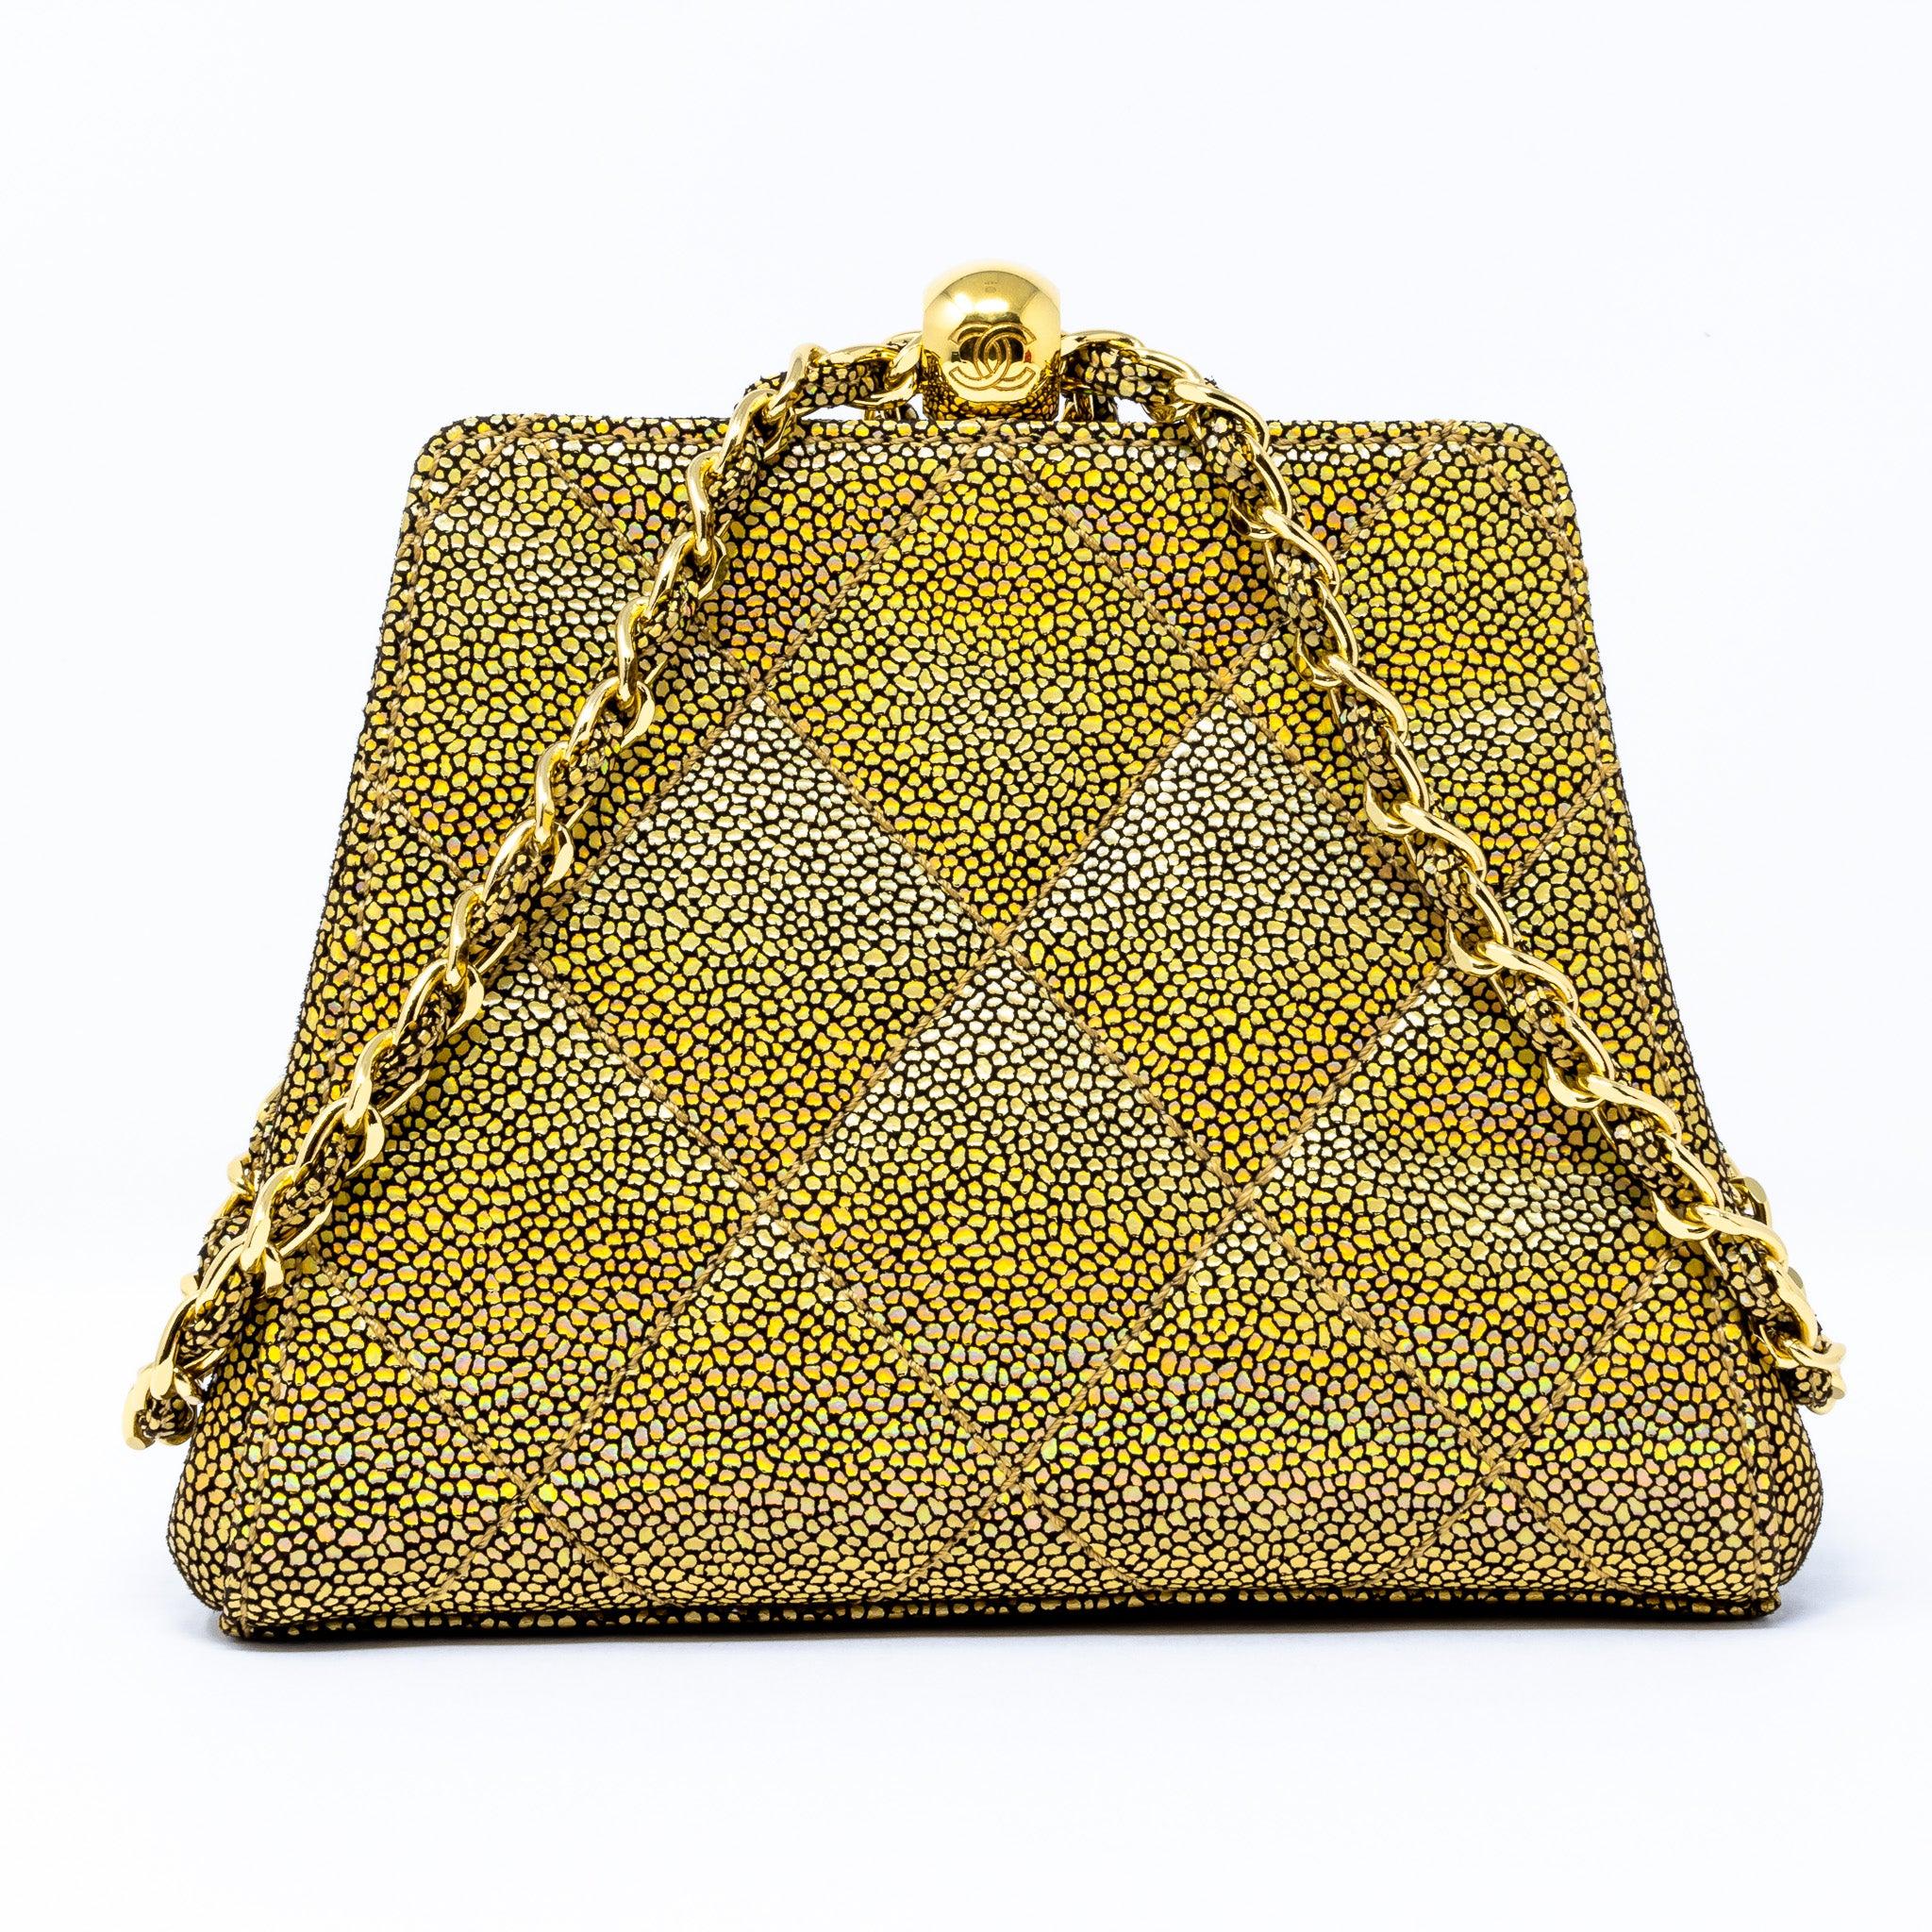 Chanel Iridescent Caviar Leather Vintage Mademoiselle Clutch with